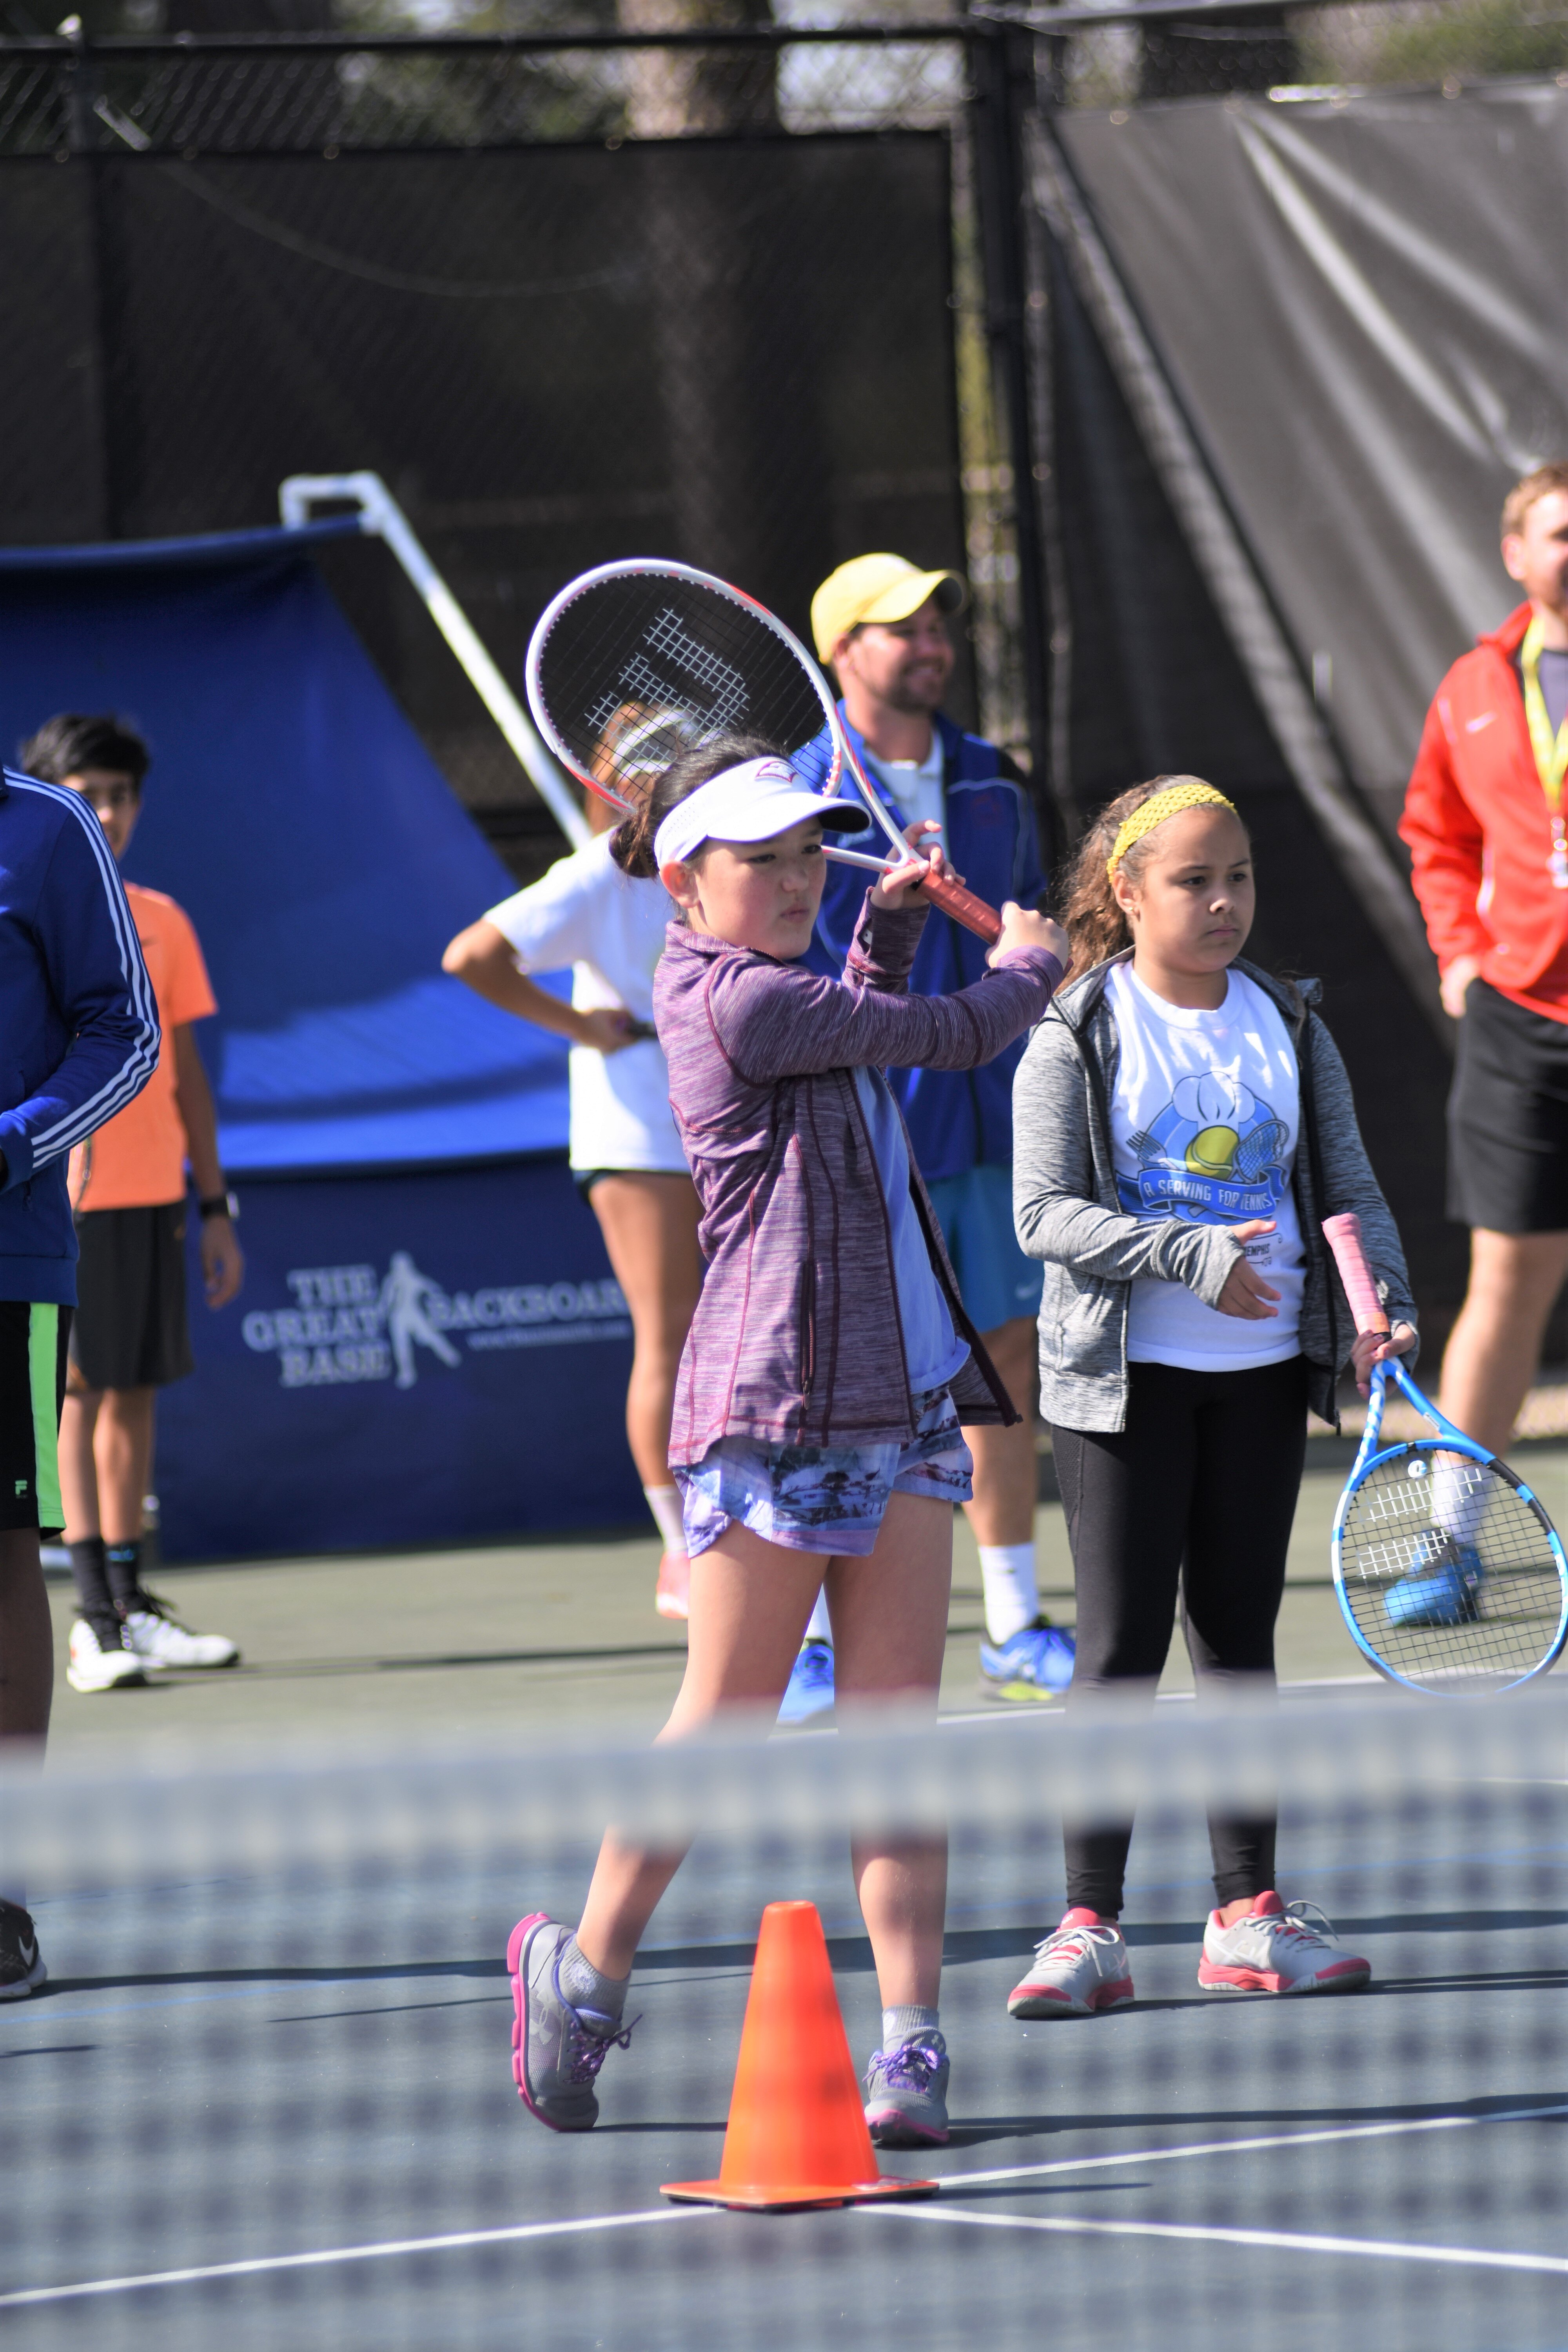 Shelby Callaghan, front left, practices hitting the tennis ball while Dianik Baldoquin waits her turn at Tennis Memphis youth program. (Tennis Memphis)